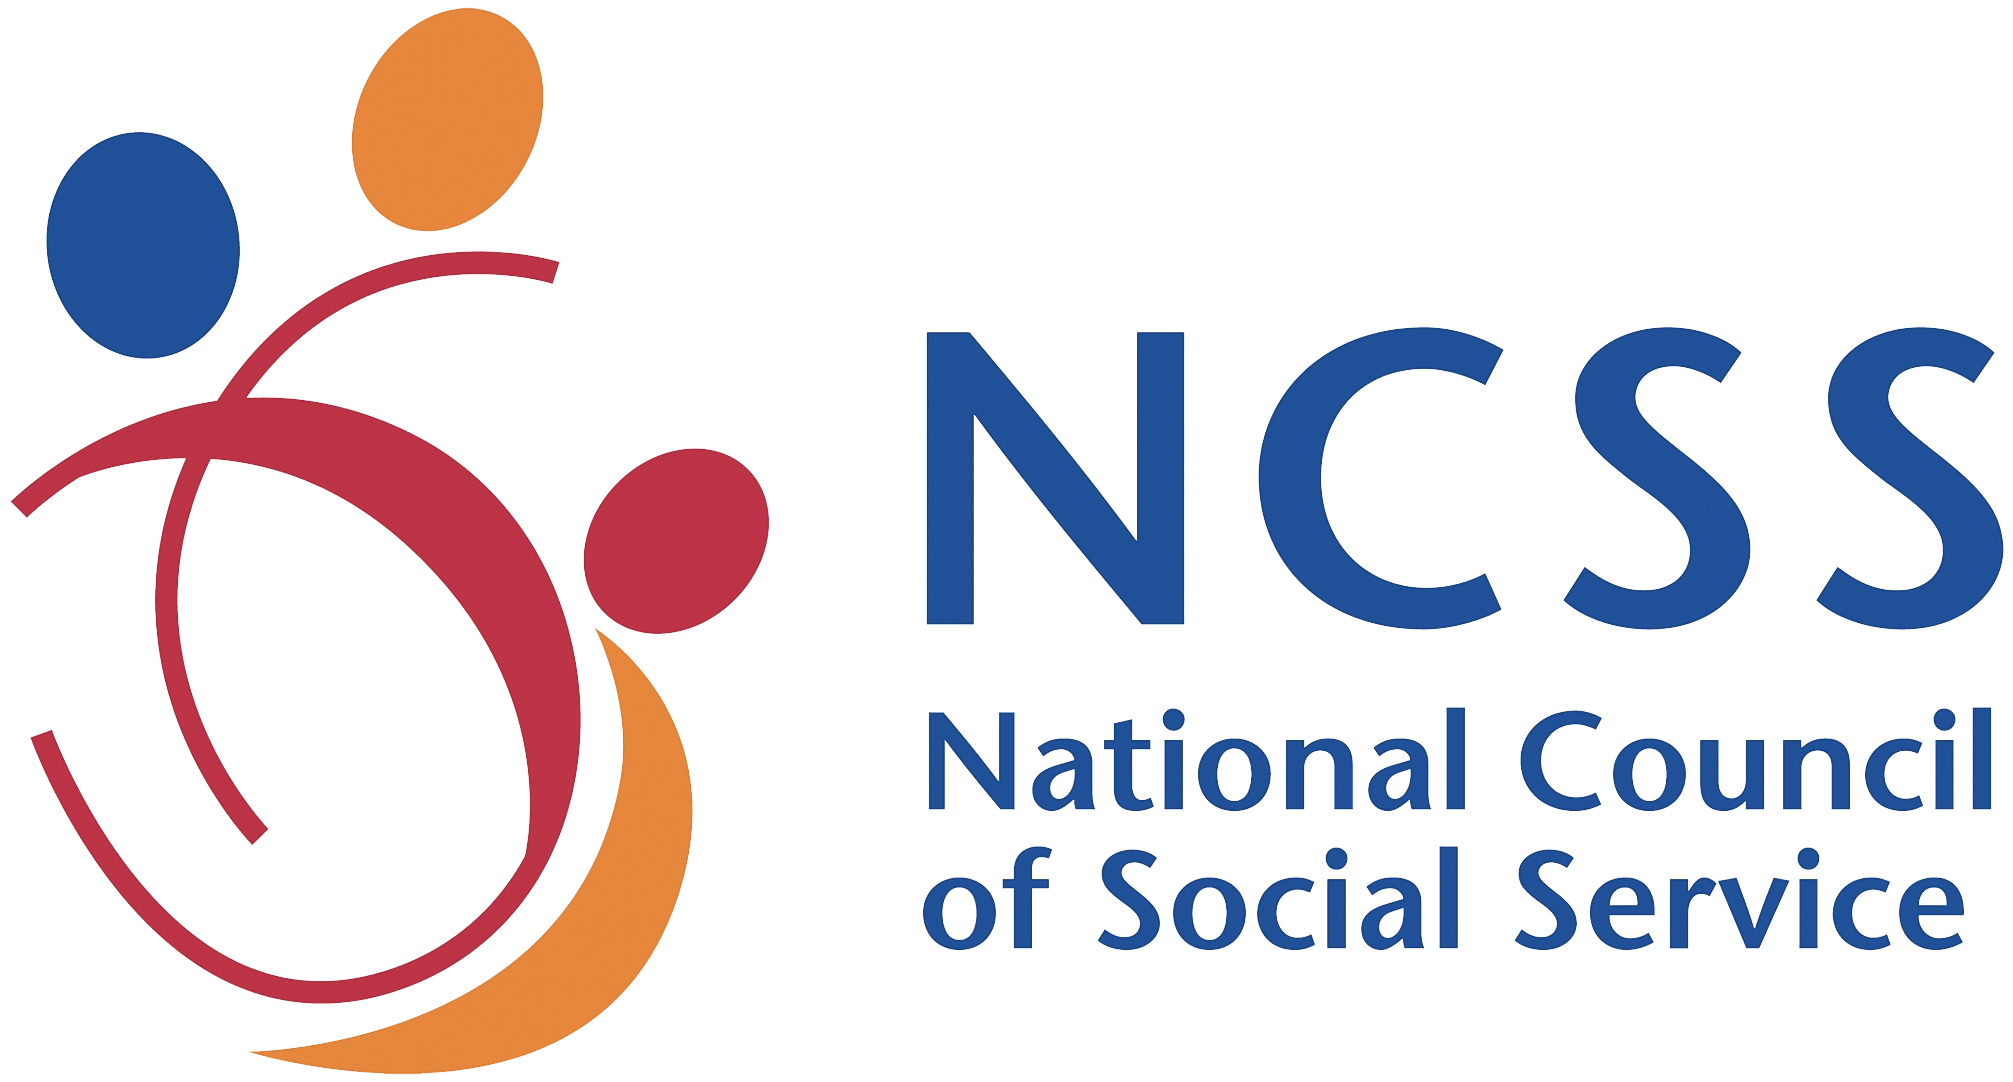 This logo of NCSS features two intertwined red curves and three dots, each in blue, orange and red. Beside this are the words ‘NCSS’ and ‘National Council of Social Service’ in blue sans-serif typeface.